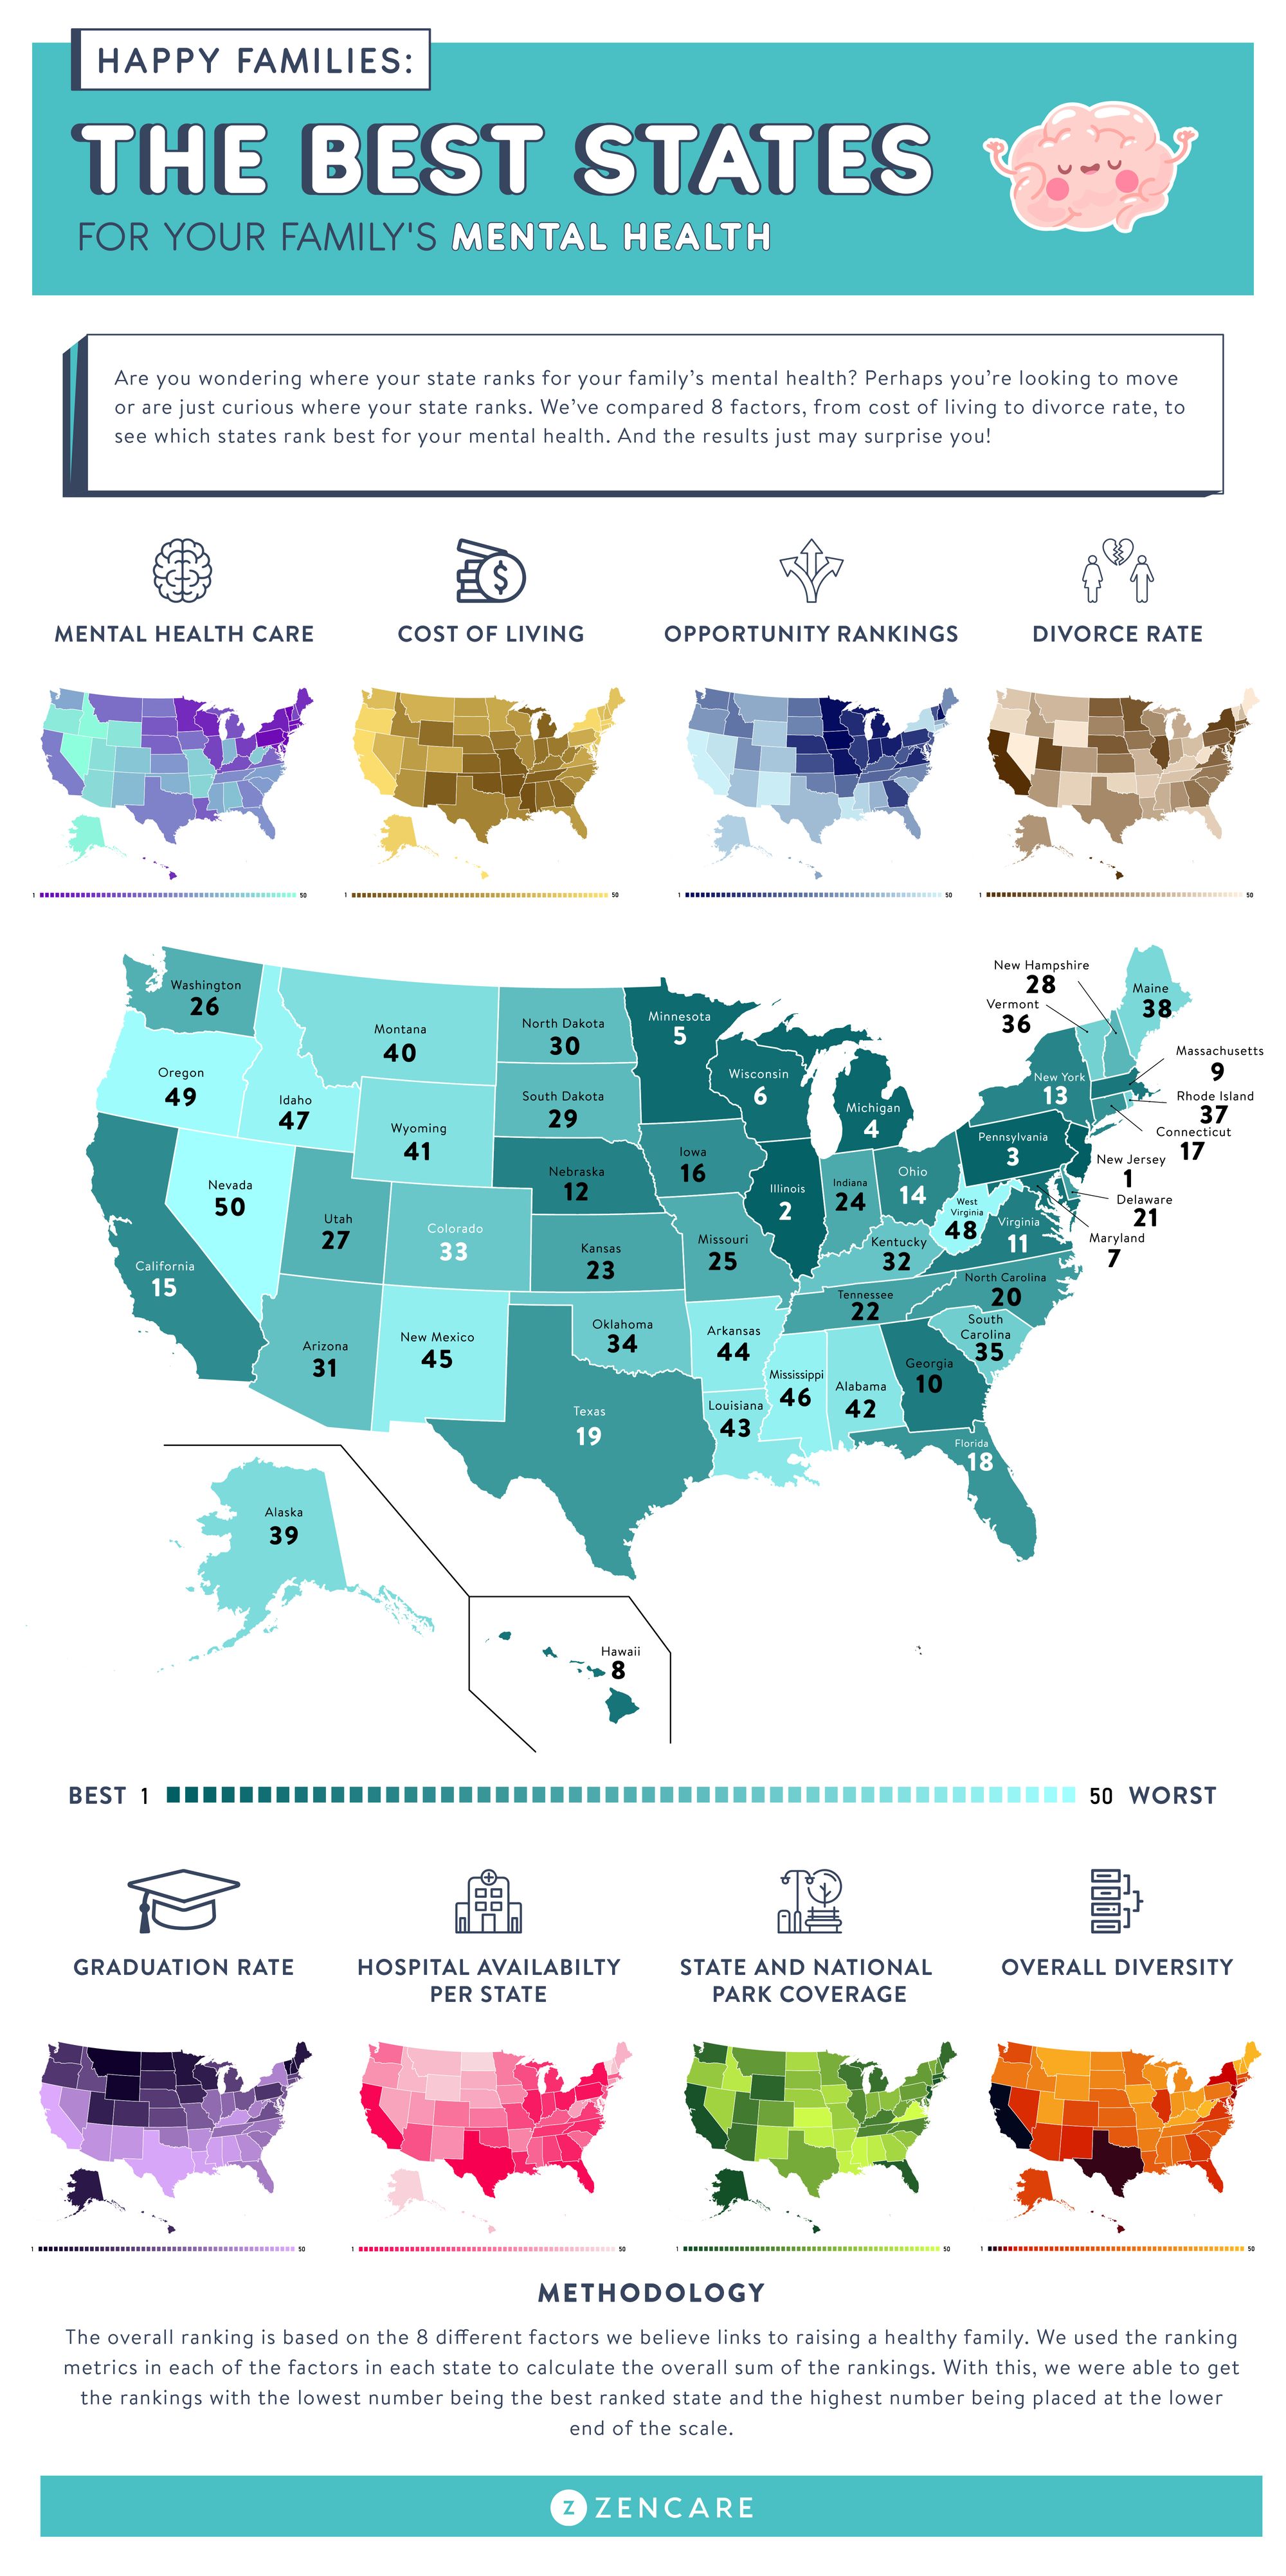 Happy Families The Best States for Your Family’s Mental Health